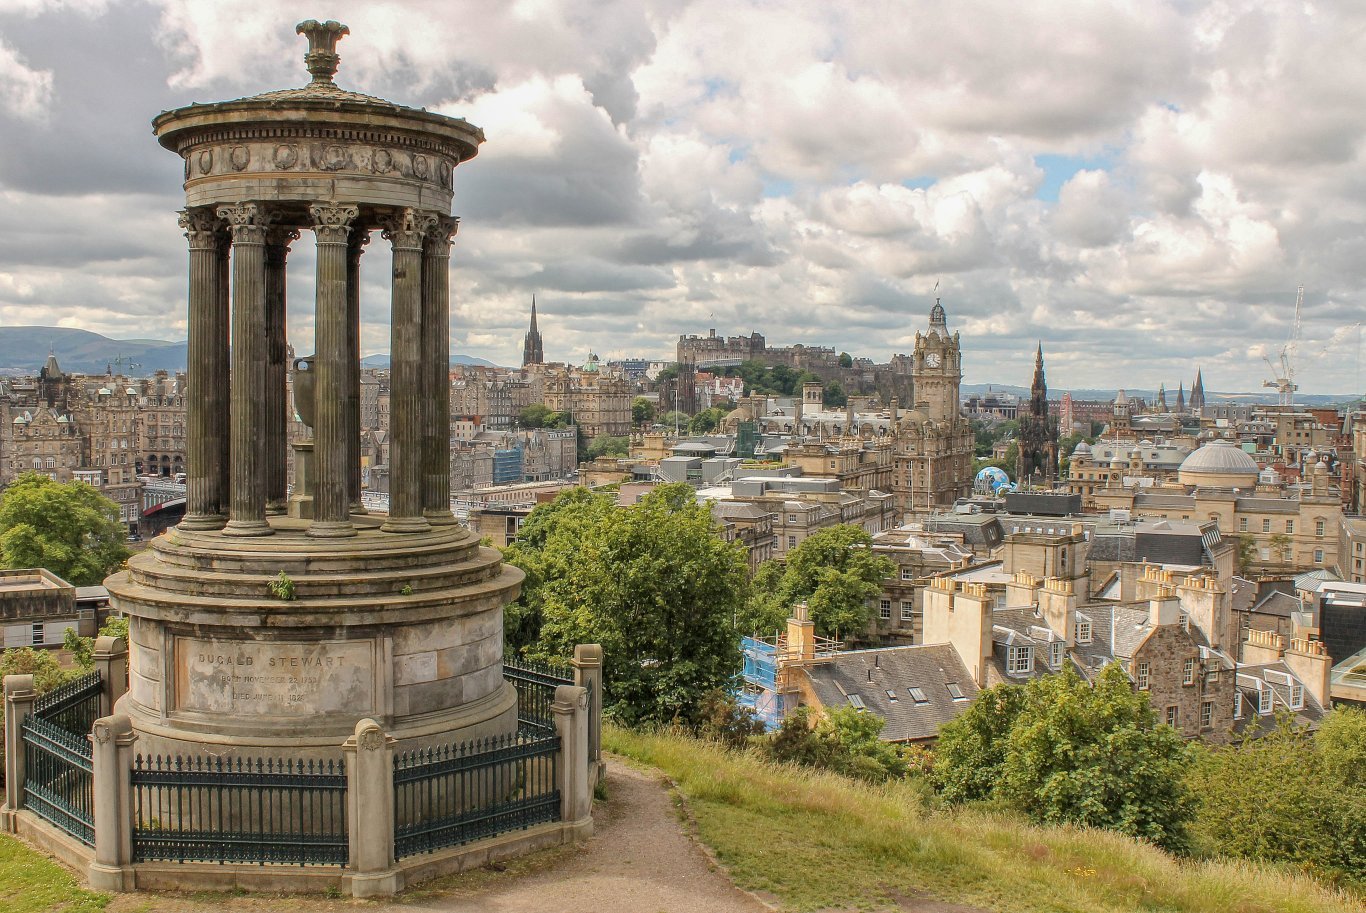 Dugald Stewart Monument and view of Edinburgh from Calton Hill